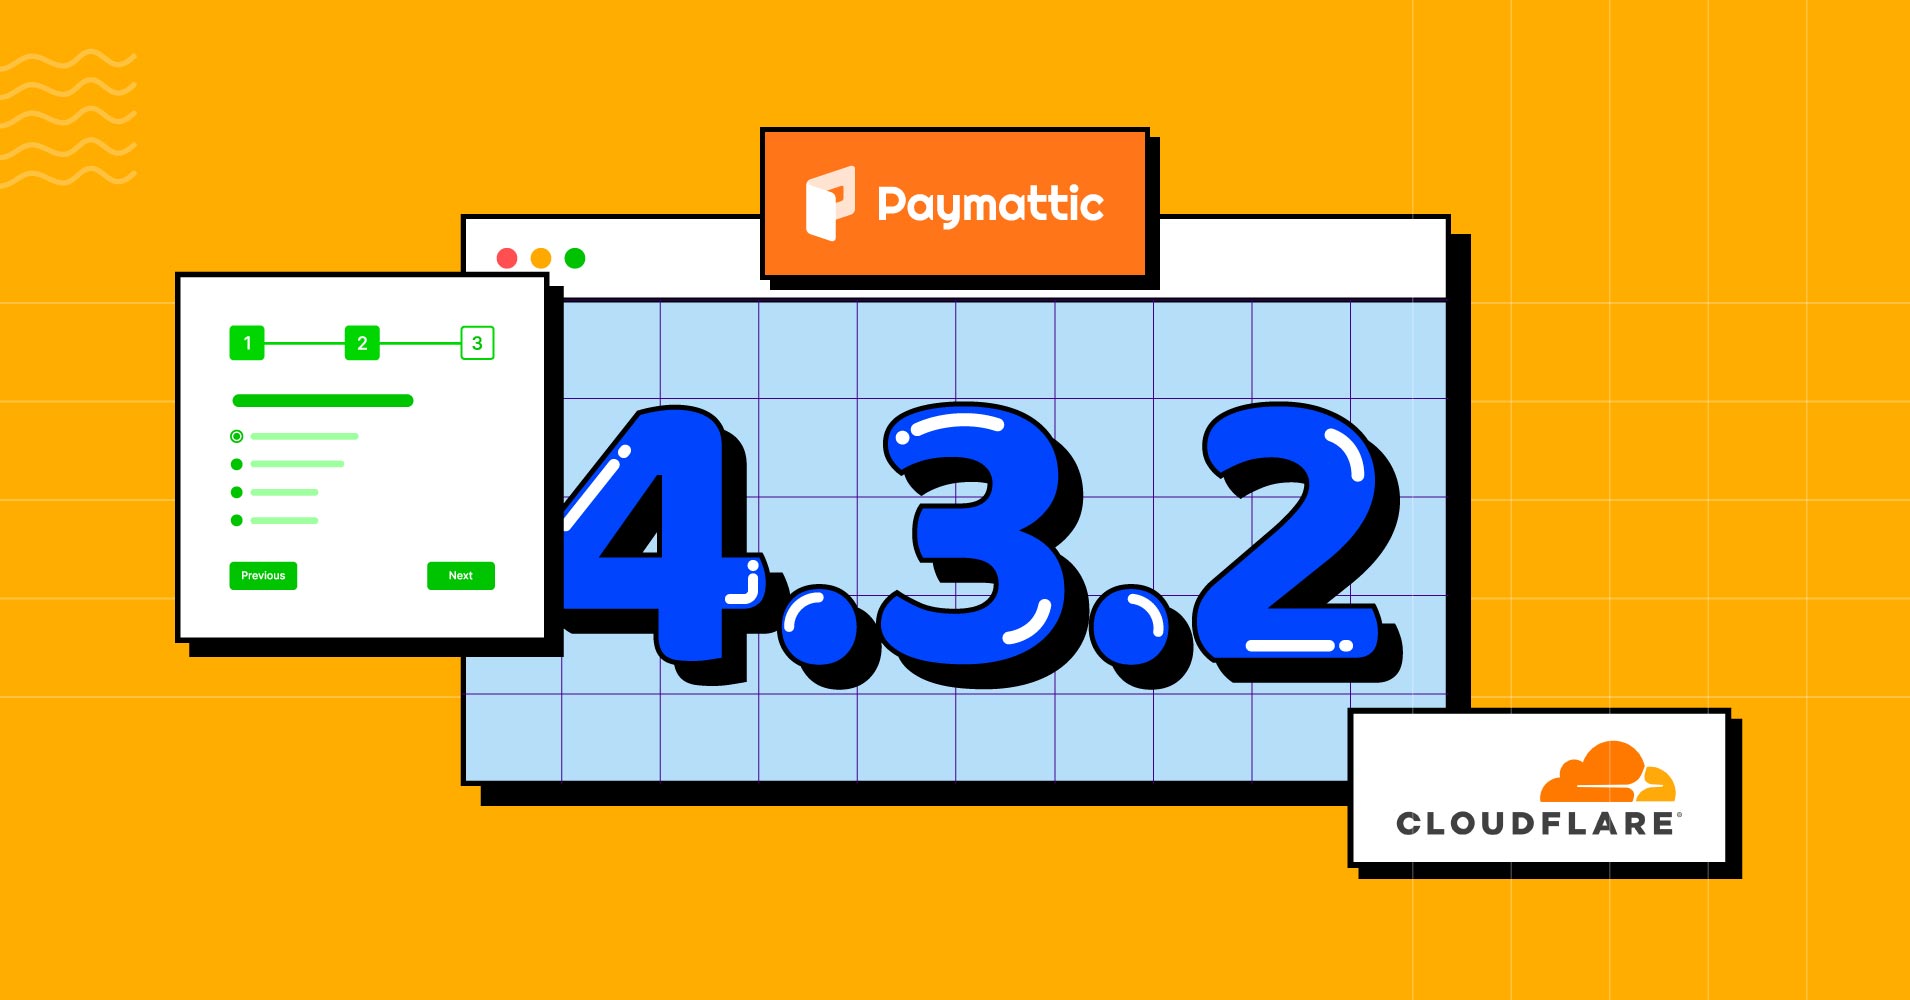 Paymattic 4.3.2 – Say Hello to Multi-step Forms and More!